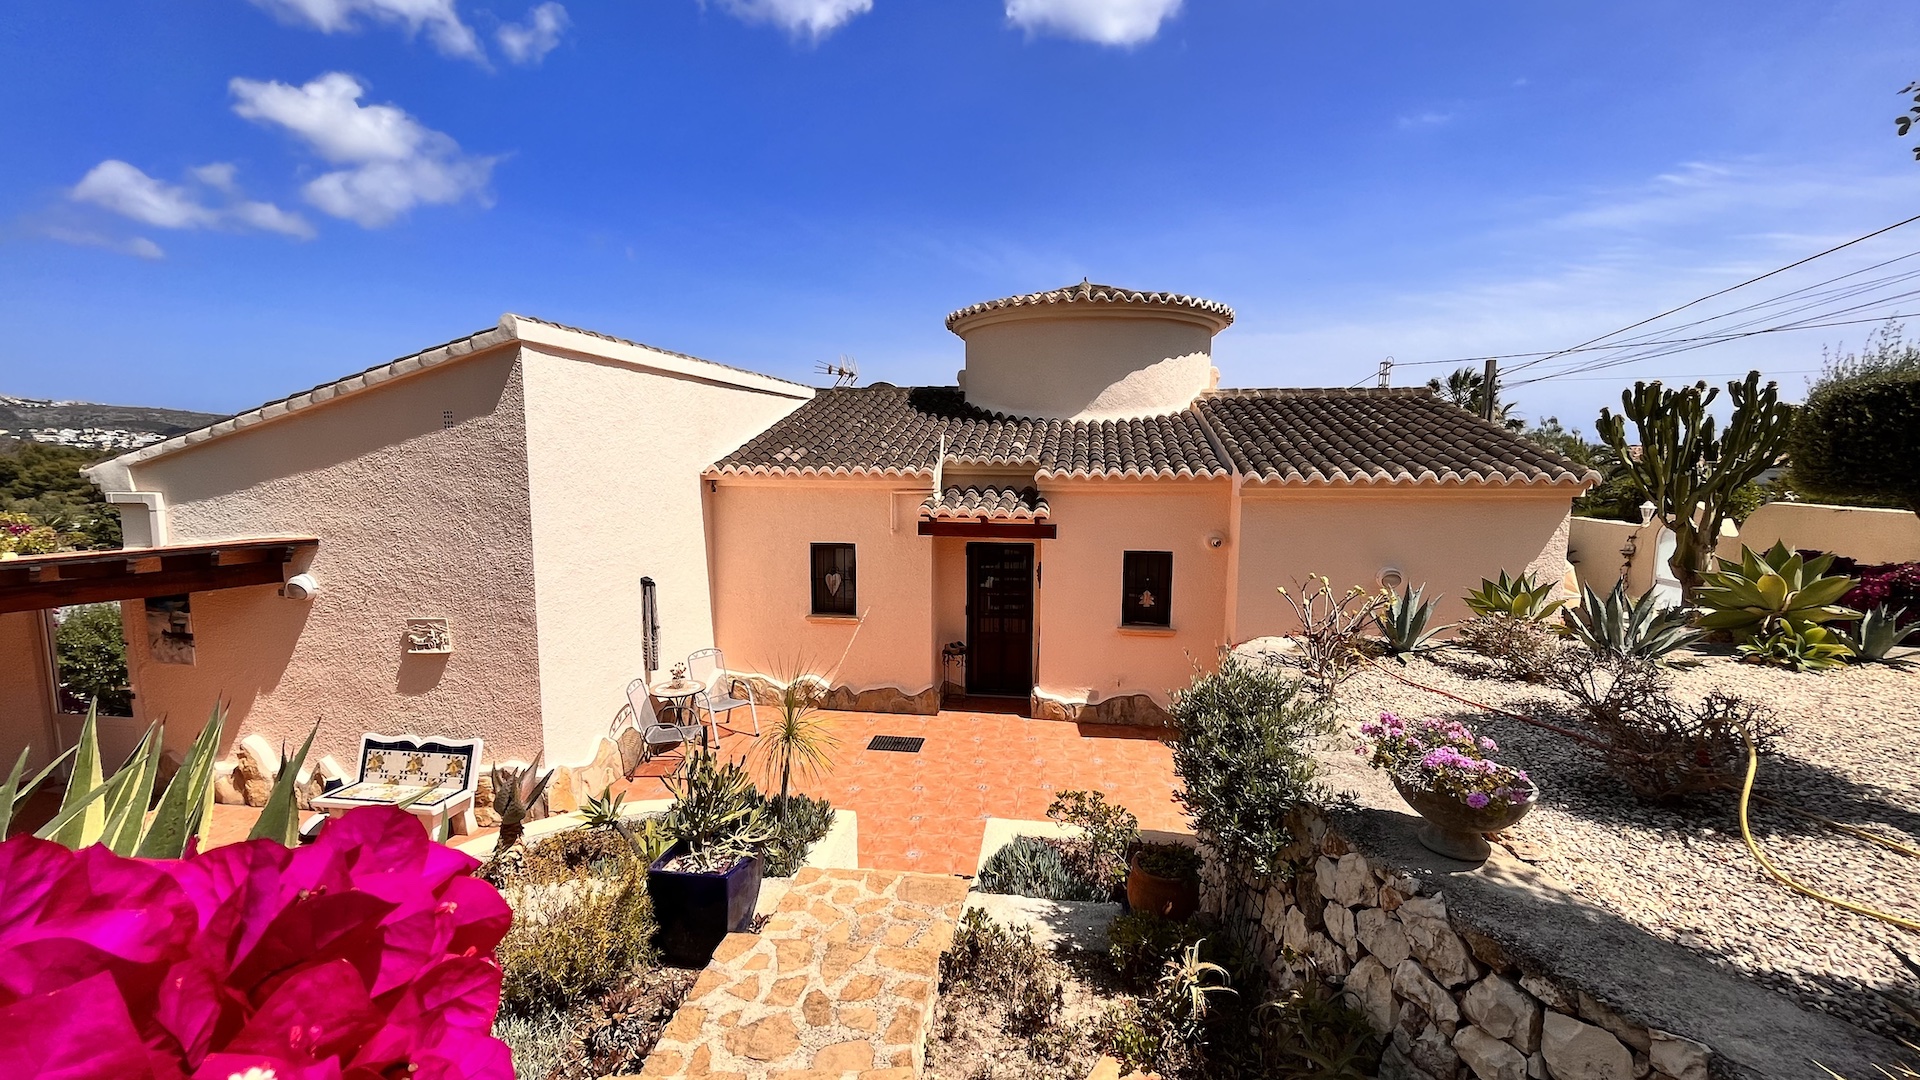 Photogallery - 8 - Exceptional homes in the Costa Blanca. Unparalleled Service. Exceptional properties in the Costa Blanca